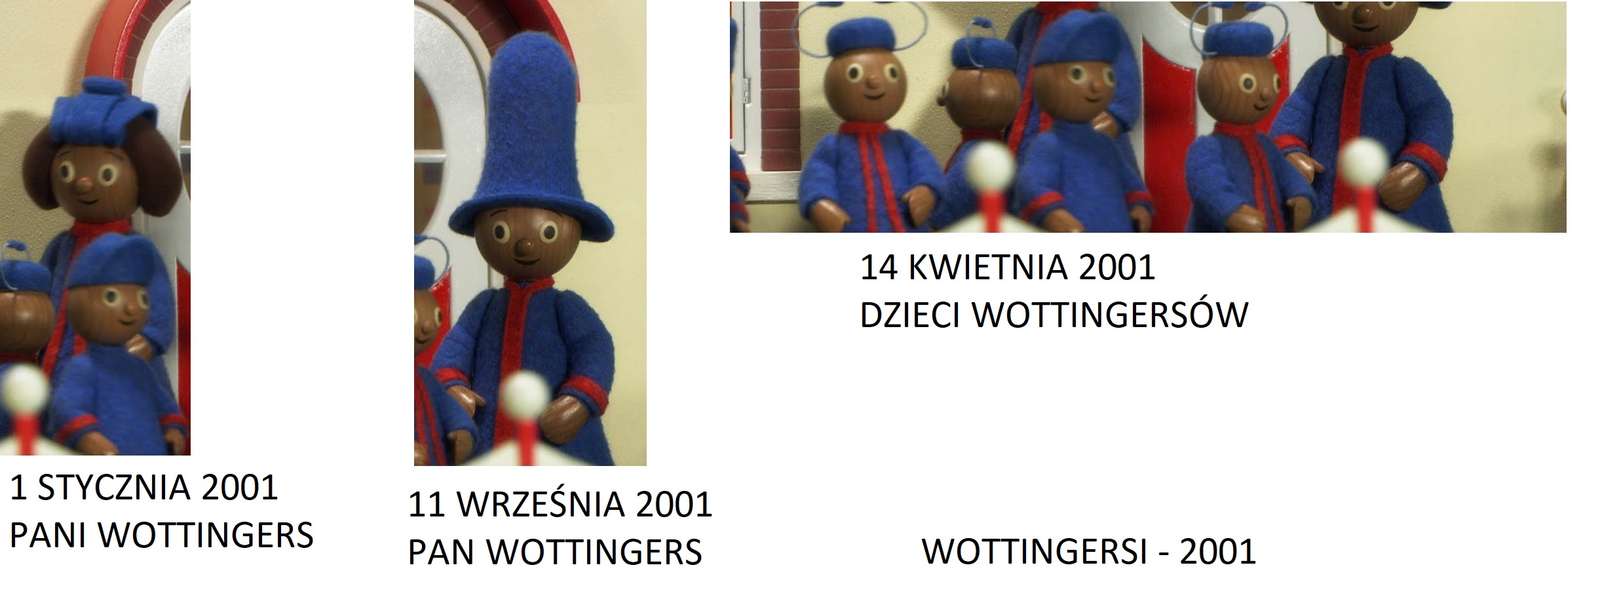 WOTTINGERS - 2001 puzzle online from photo